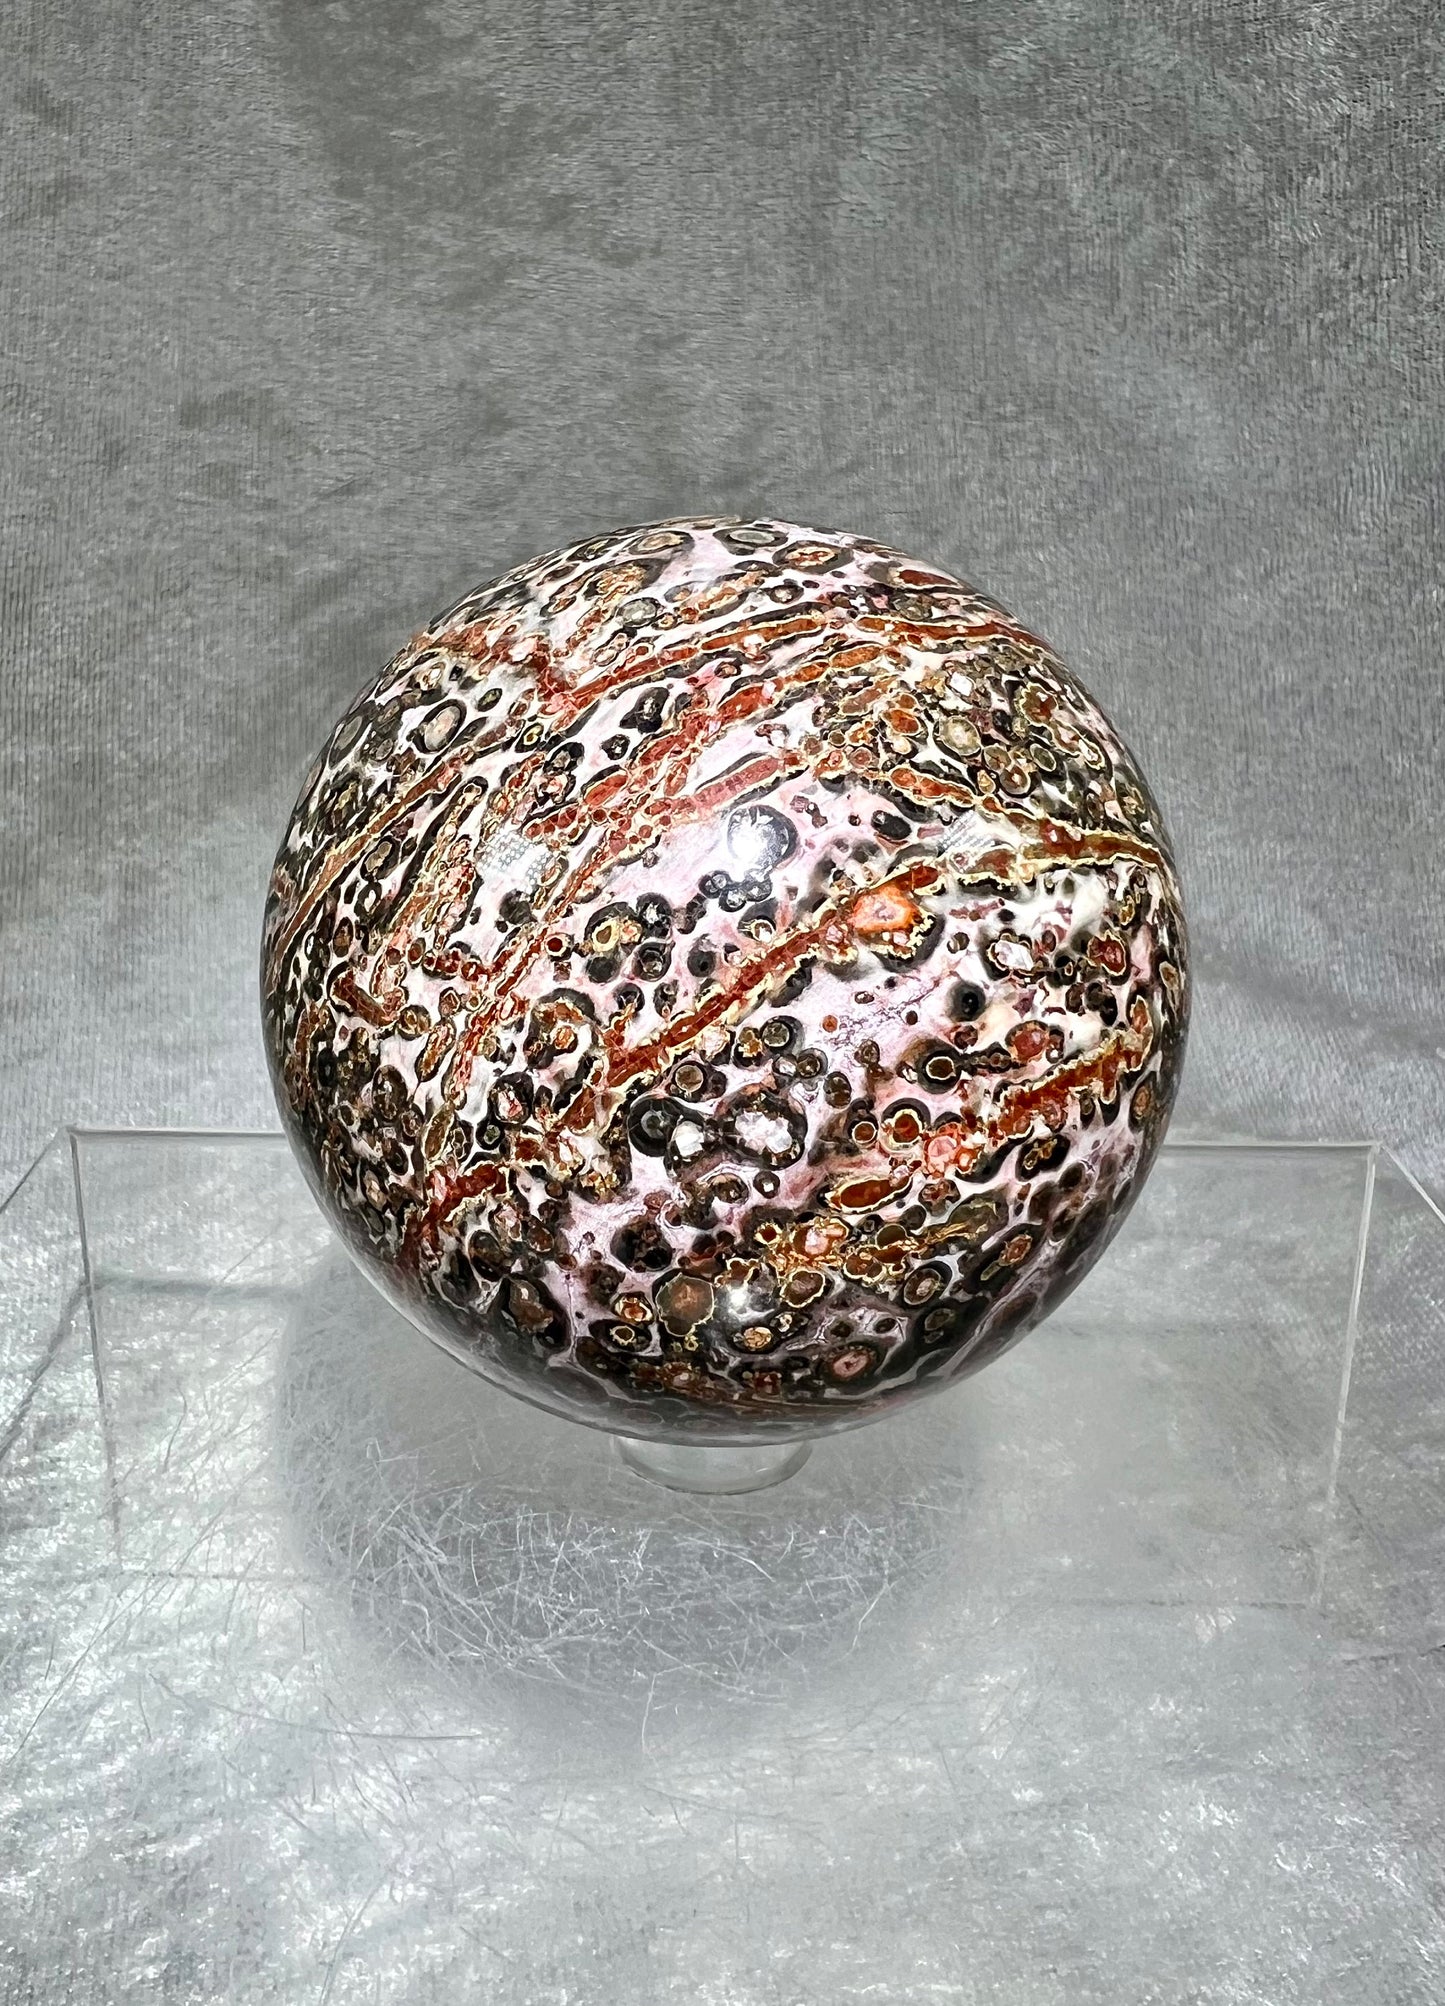 Gorgeous Orbicular Jasper Sphere. 68mm. Amazing Rare Pastel Colors. Very High Quality Crystal Sphere.